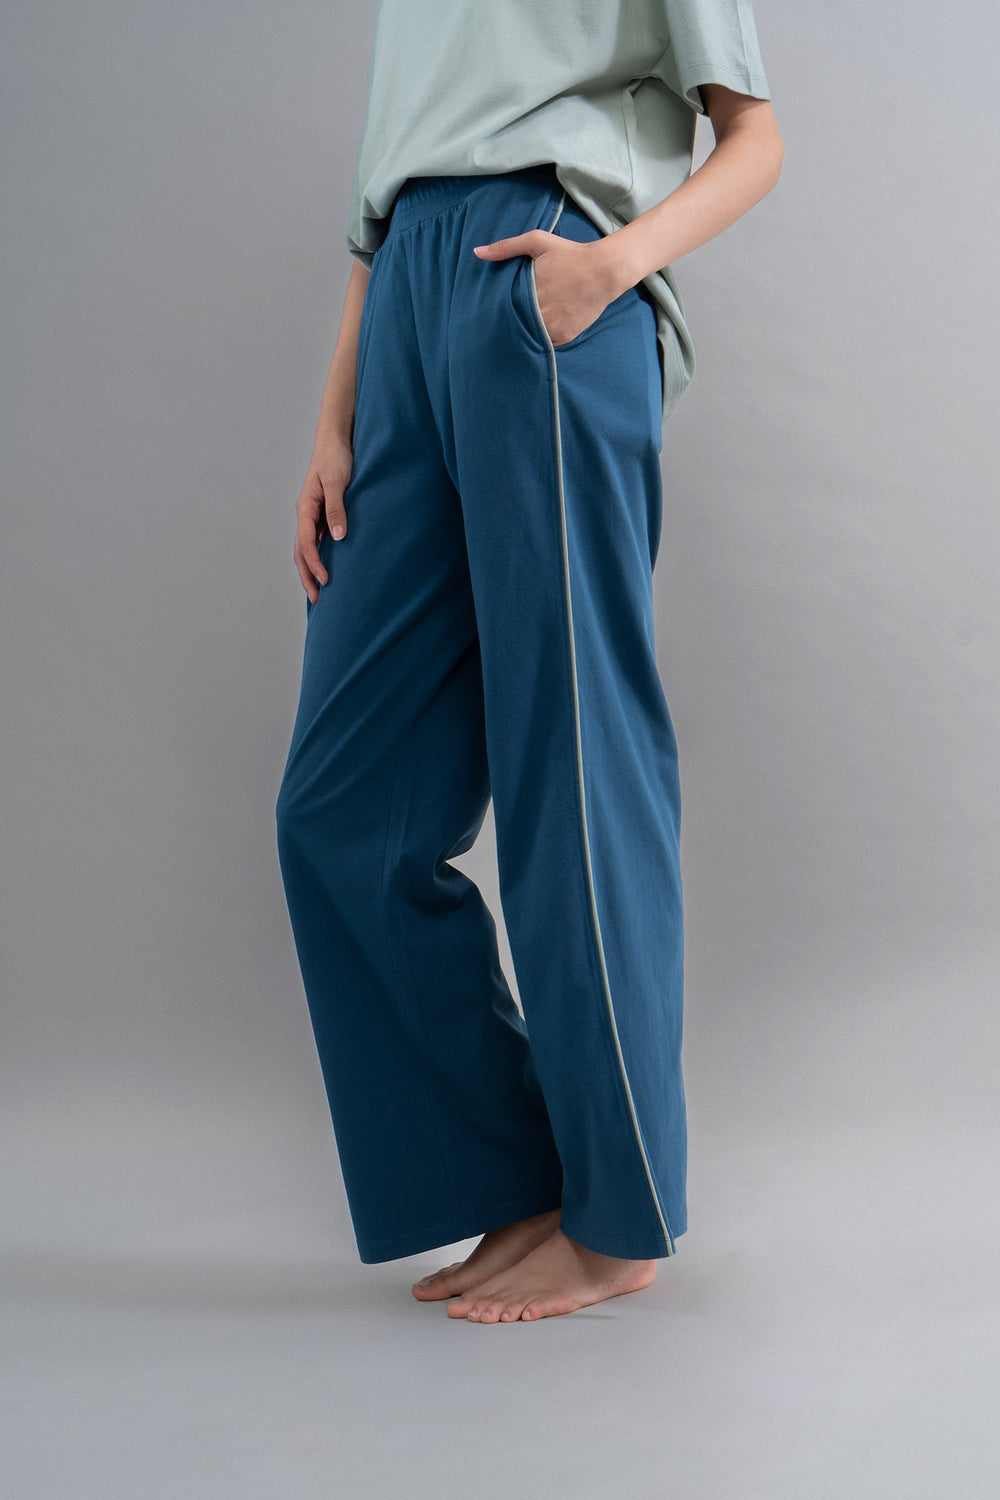 Sage Teal Cotton Lounge Pant With Contrast Piping